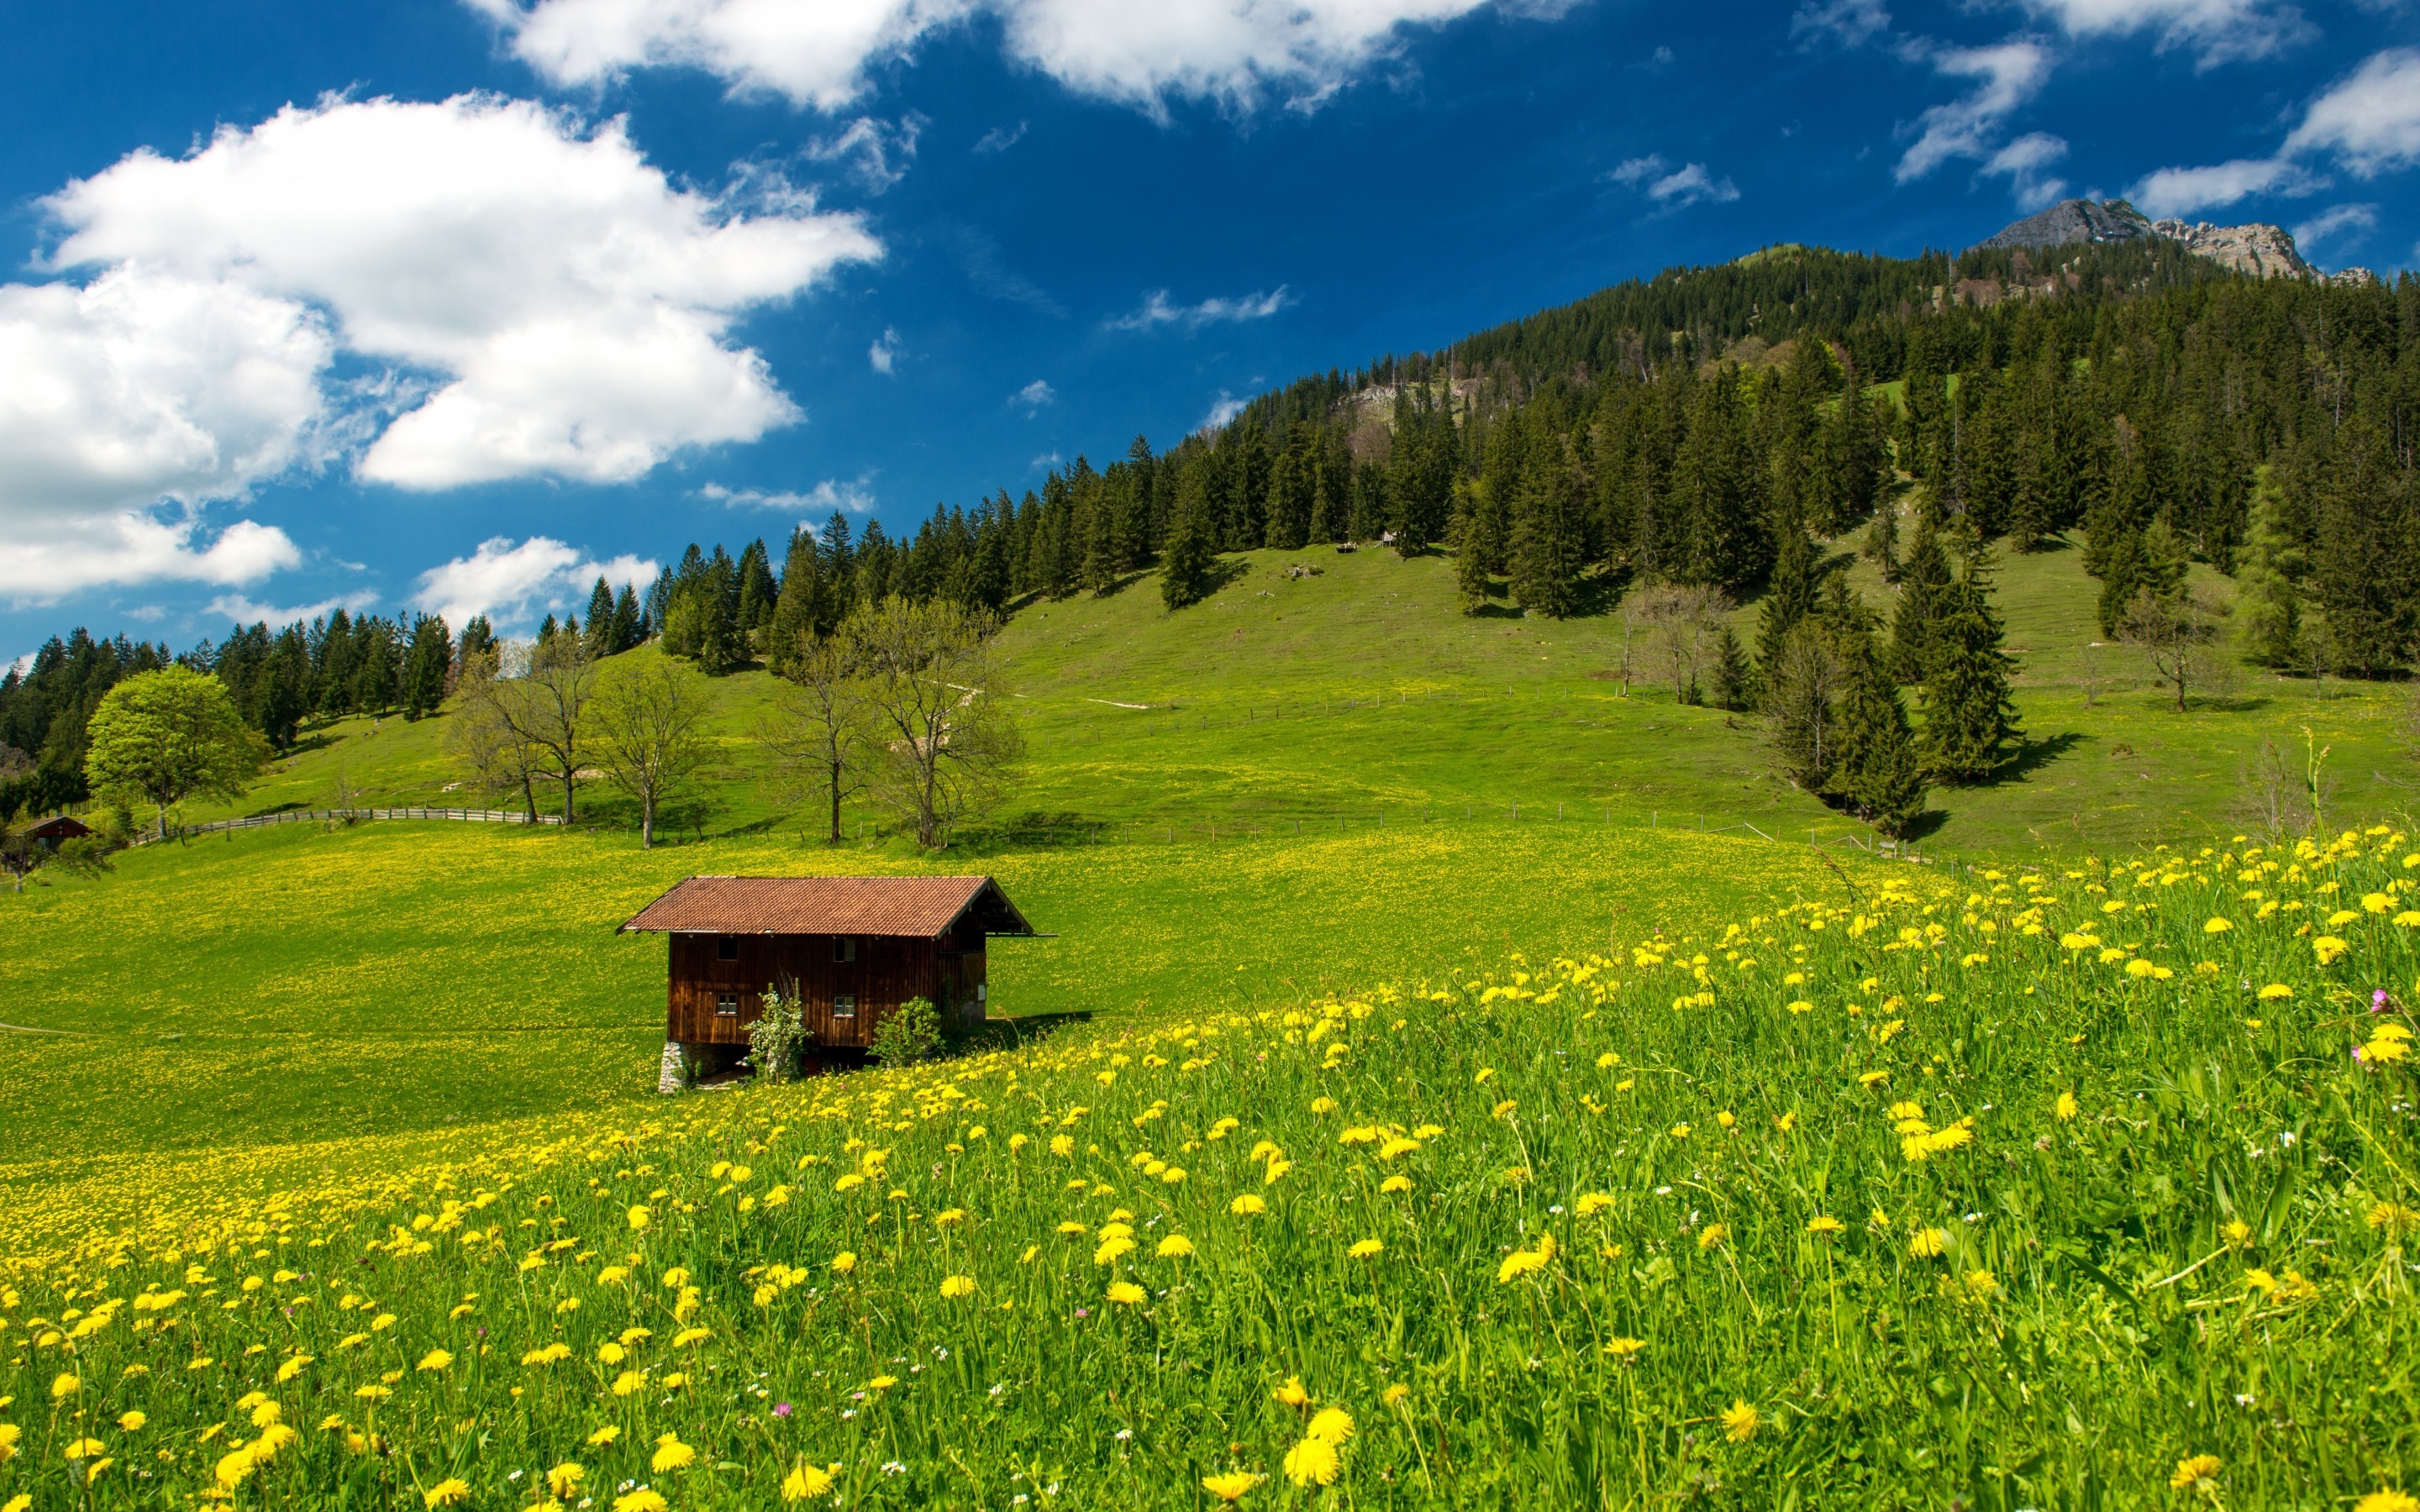 Pasture in the Bavarian Alp for 2880 x 1800 Retina Display resolution